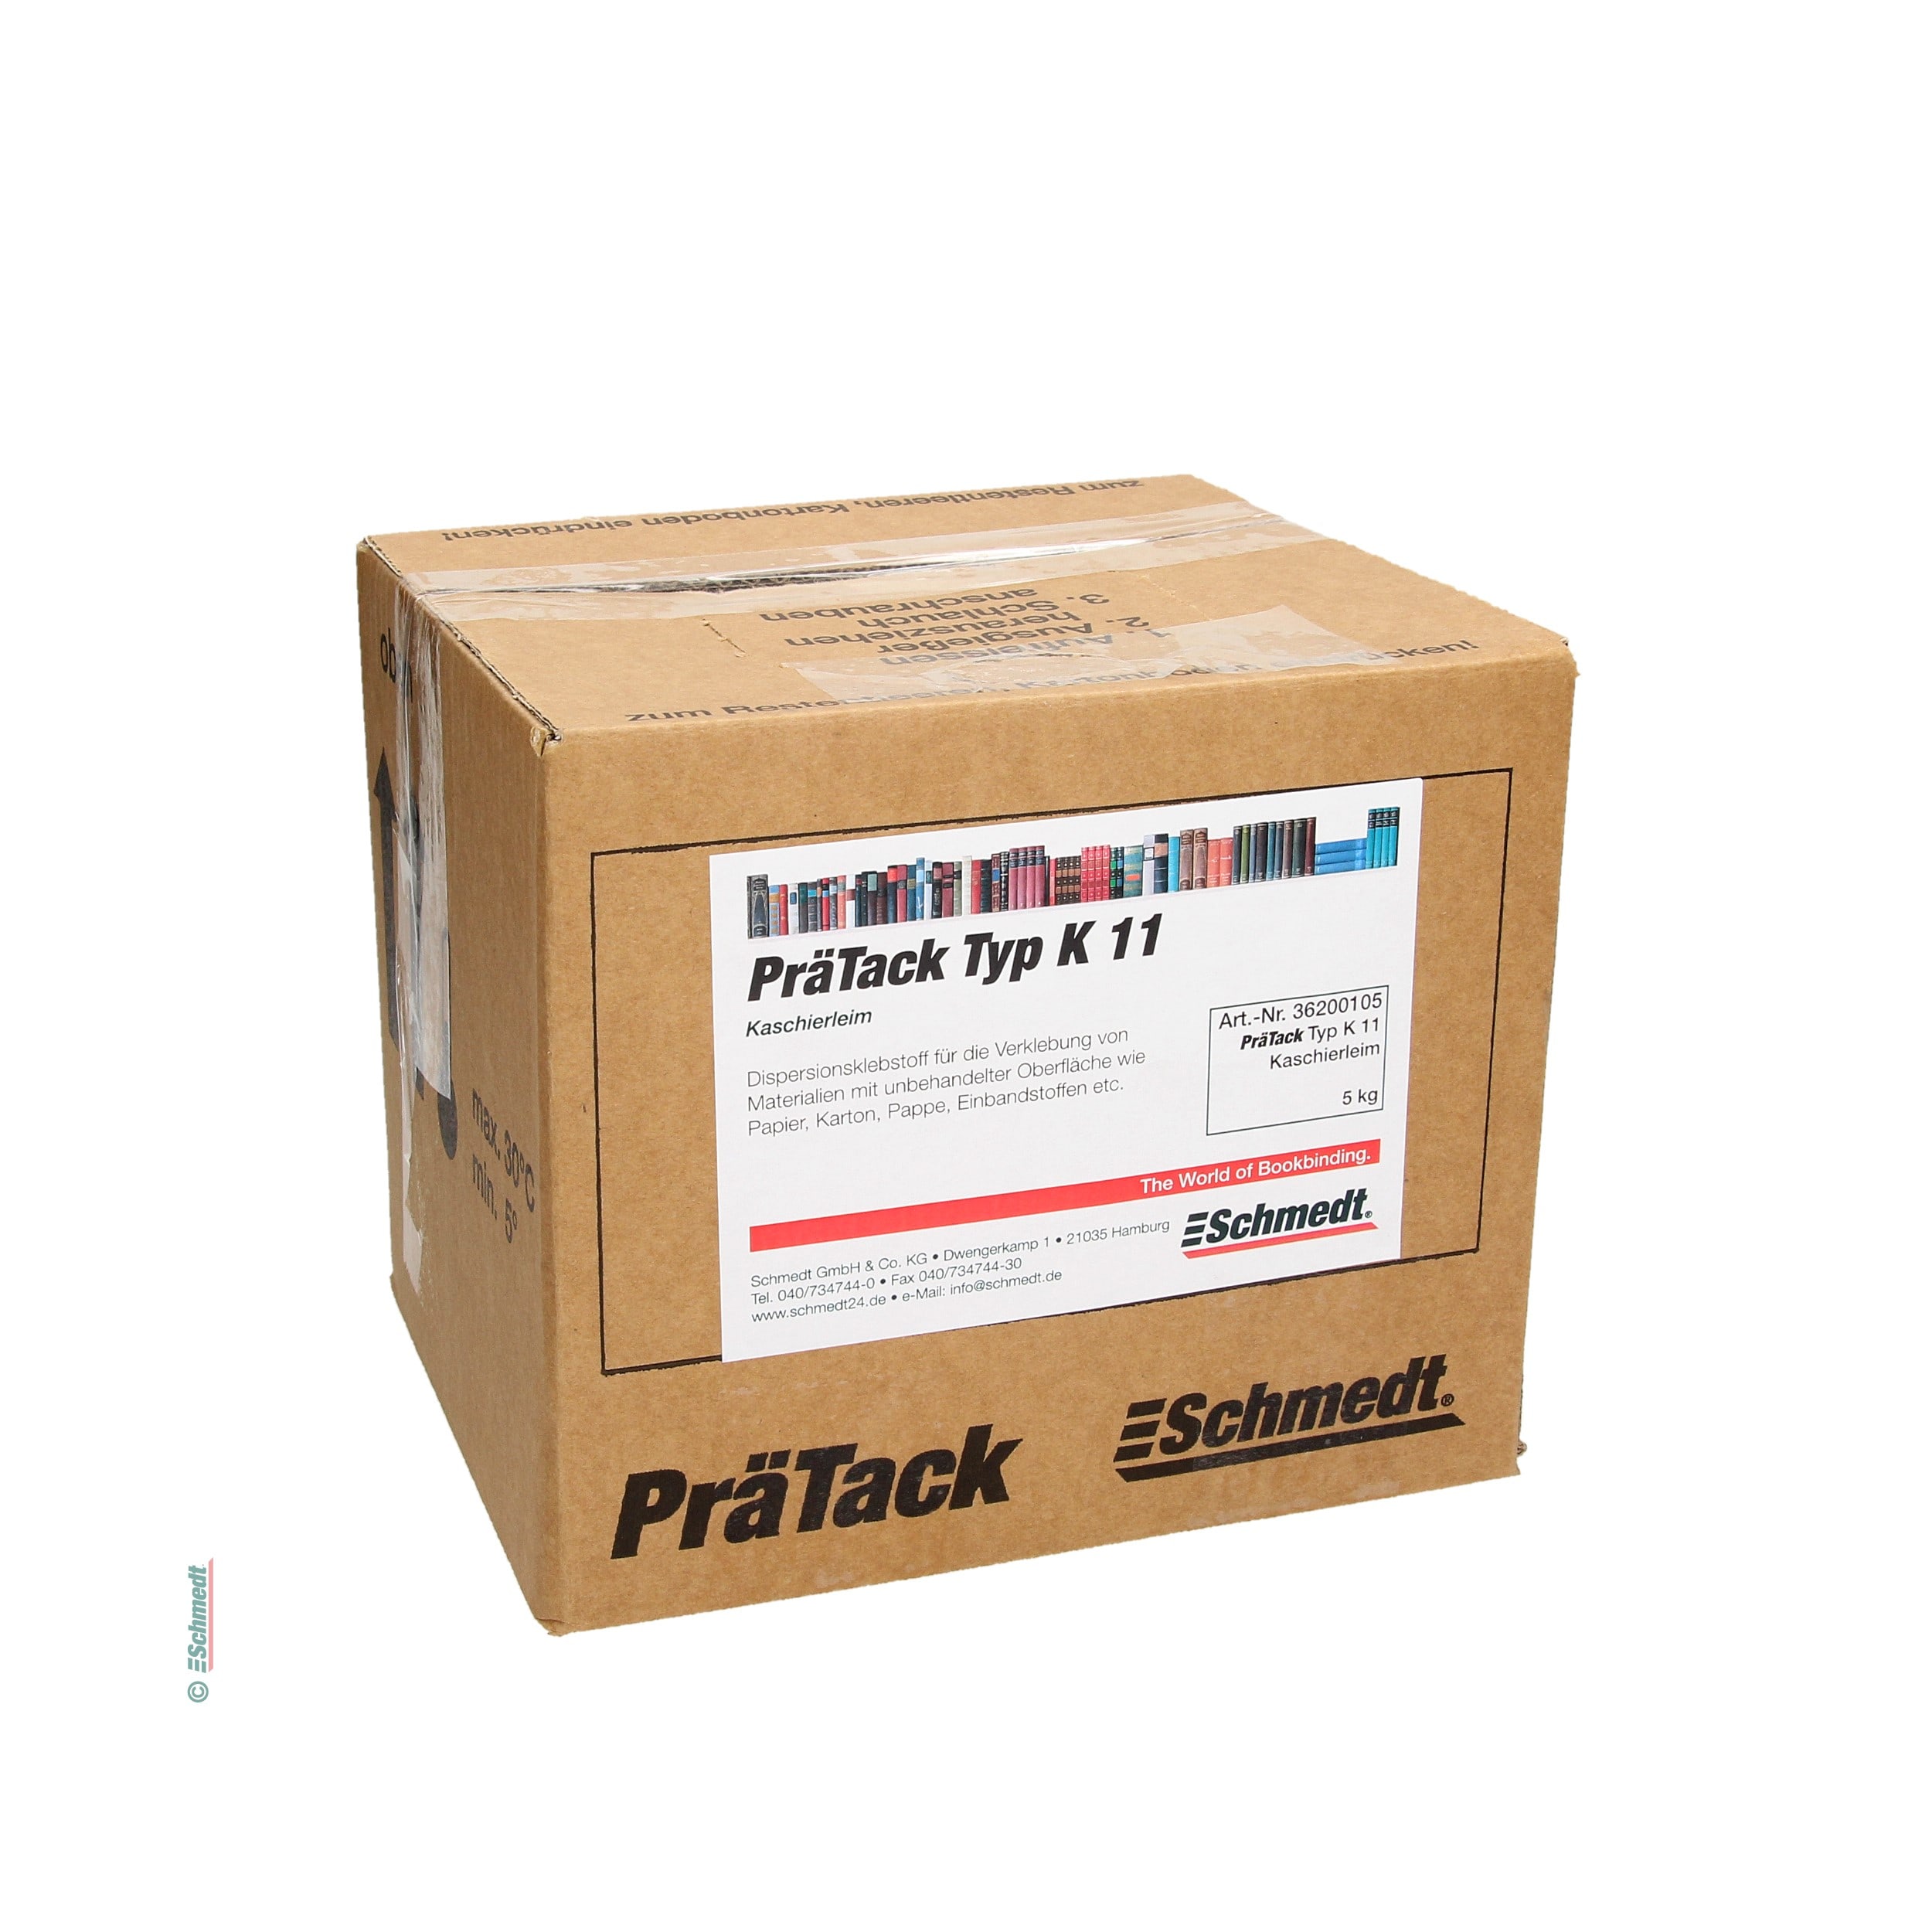 PräTack K11 - Contents Bag-in-Box / 5 kgs - for laminating materials with untreated surfaces such as paper, cardboard, board, bookbinding ma...